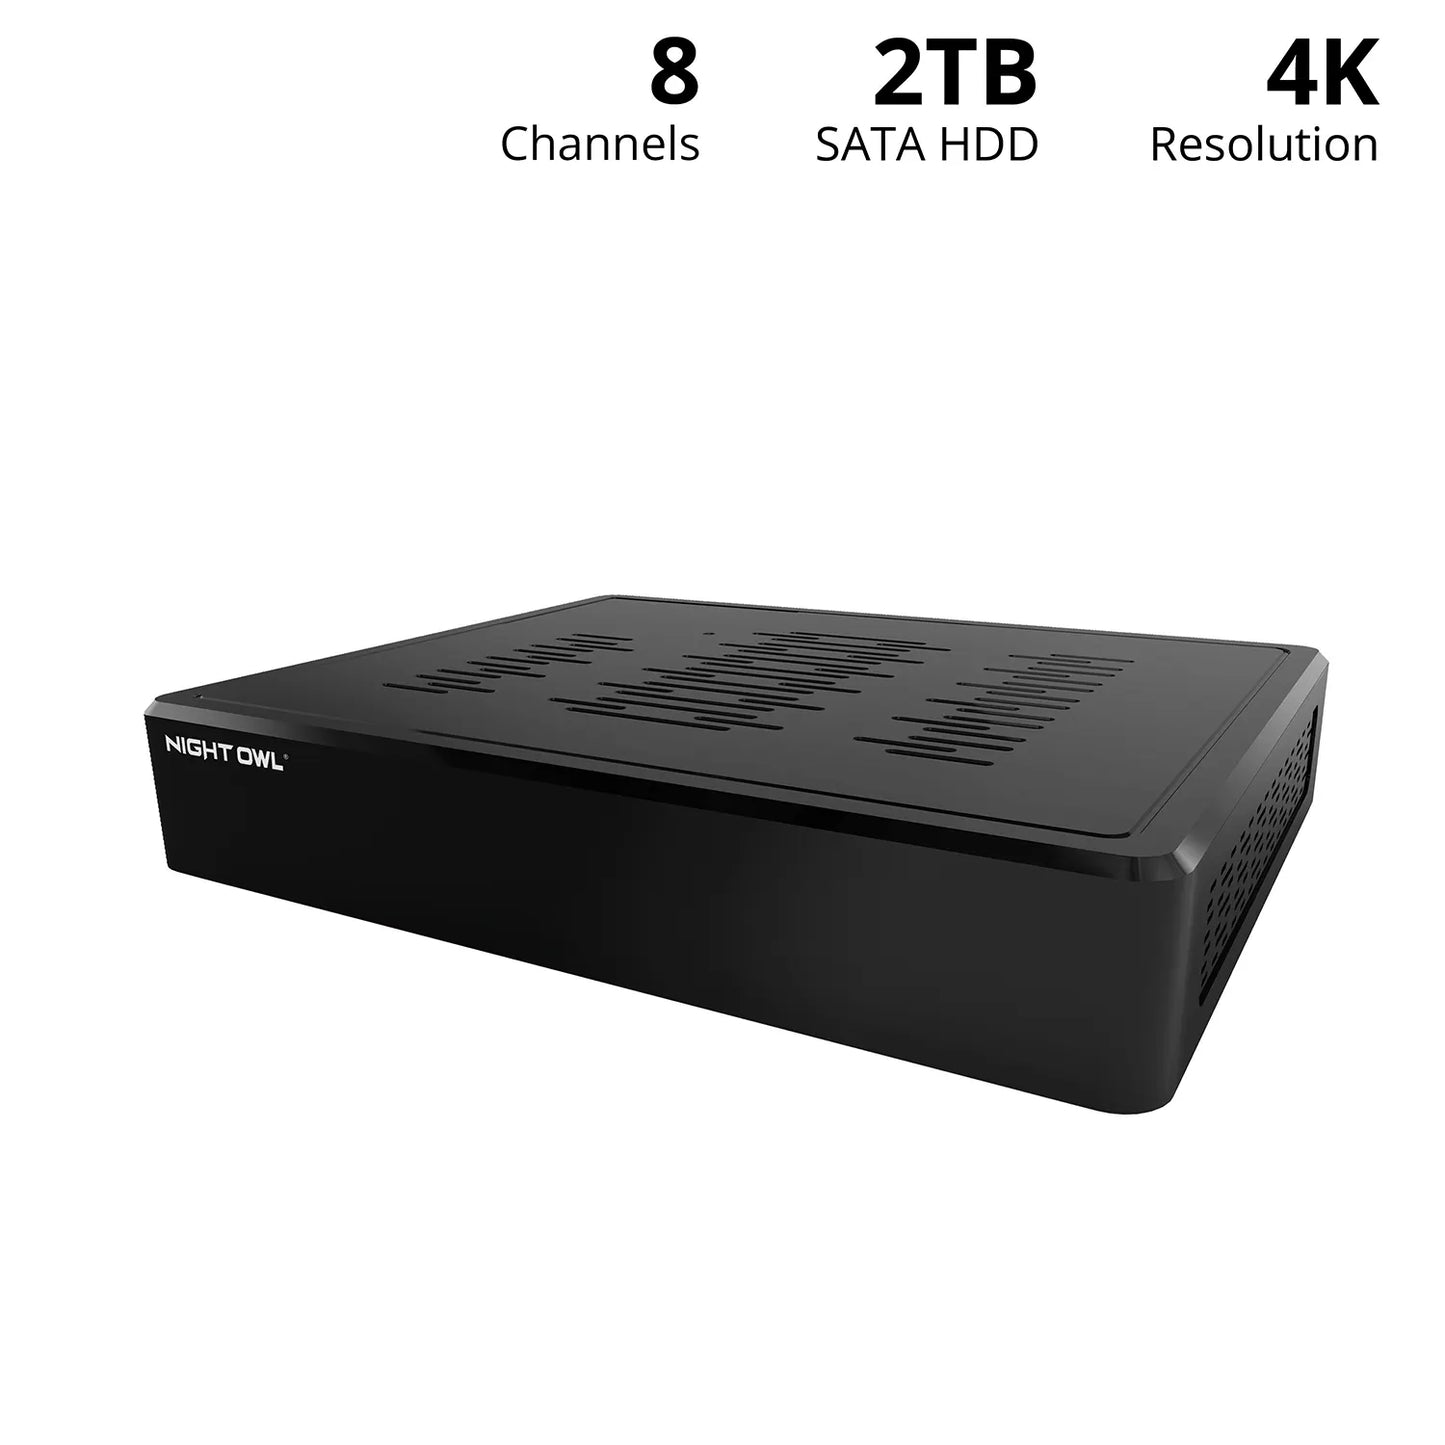 8 Channel 4K Bluetooth NVR with 2TB Hard Drive - Add up to 12 Total Devices